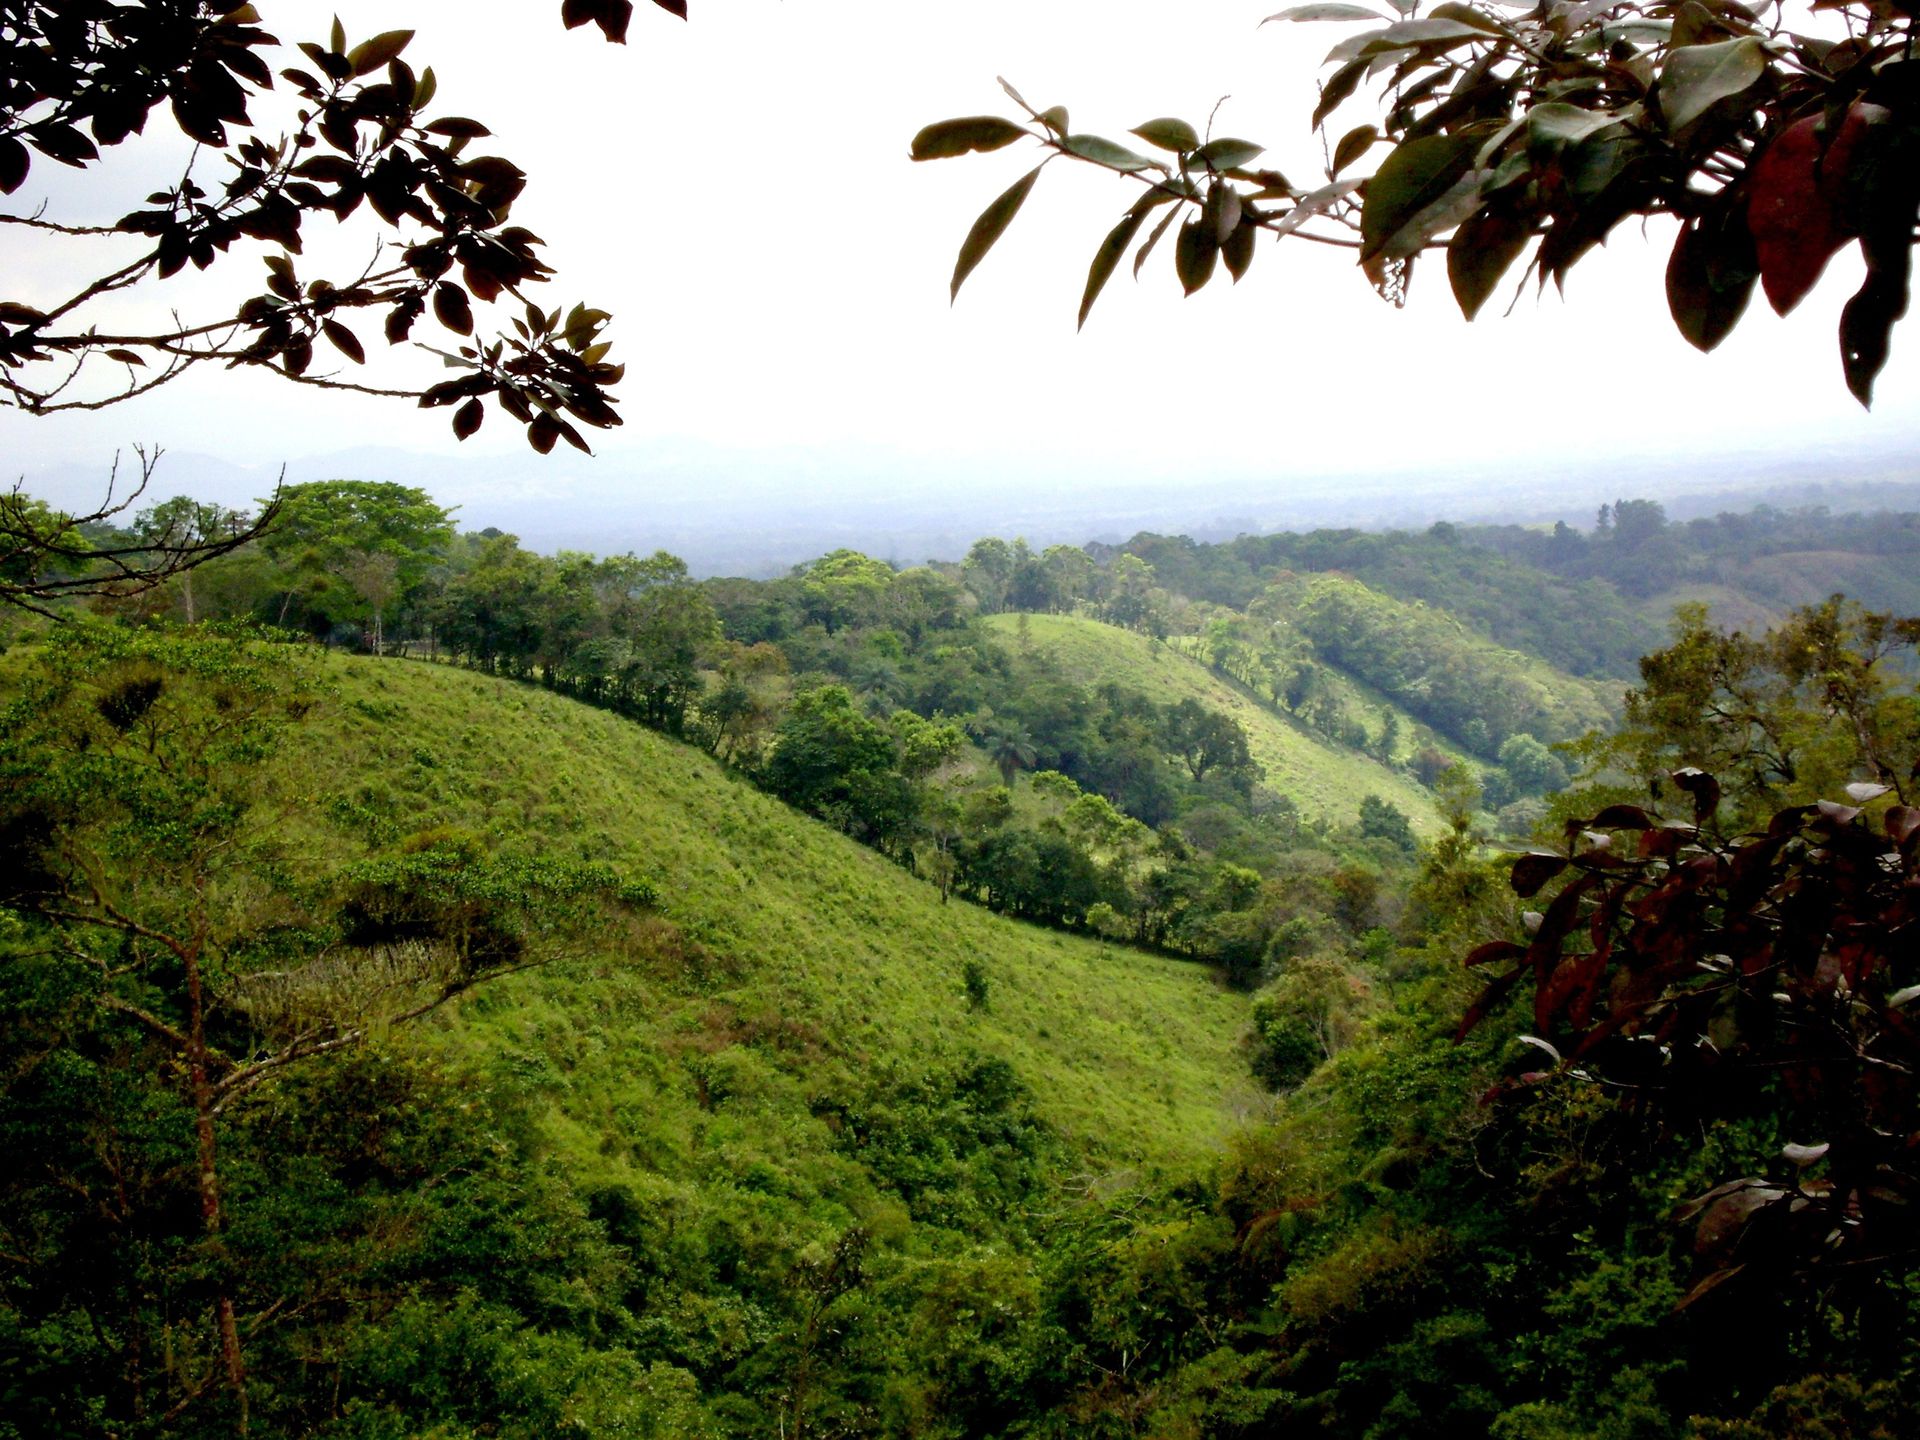 A view of a hilly landscape covered in green grass and trees.